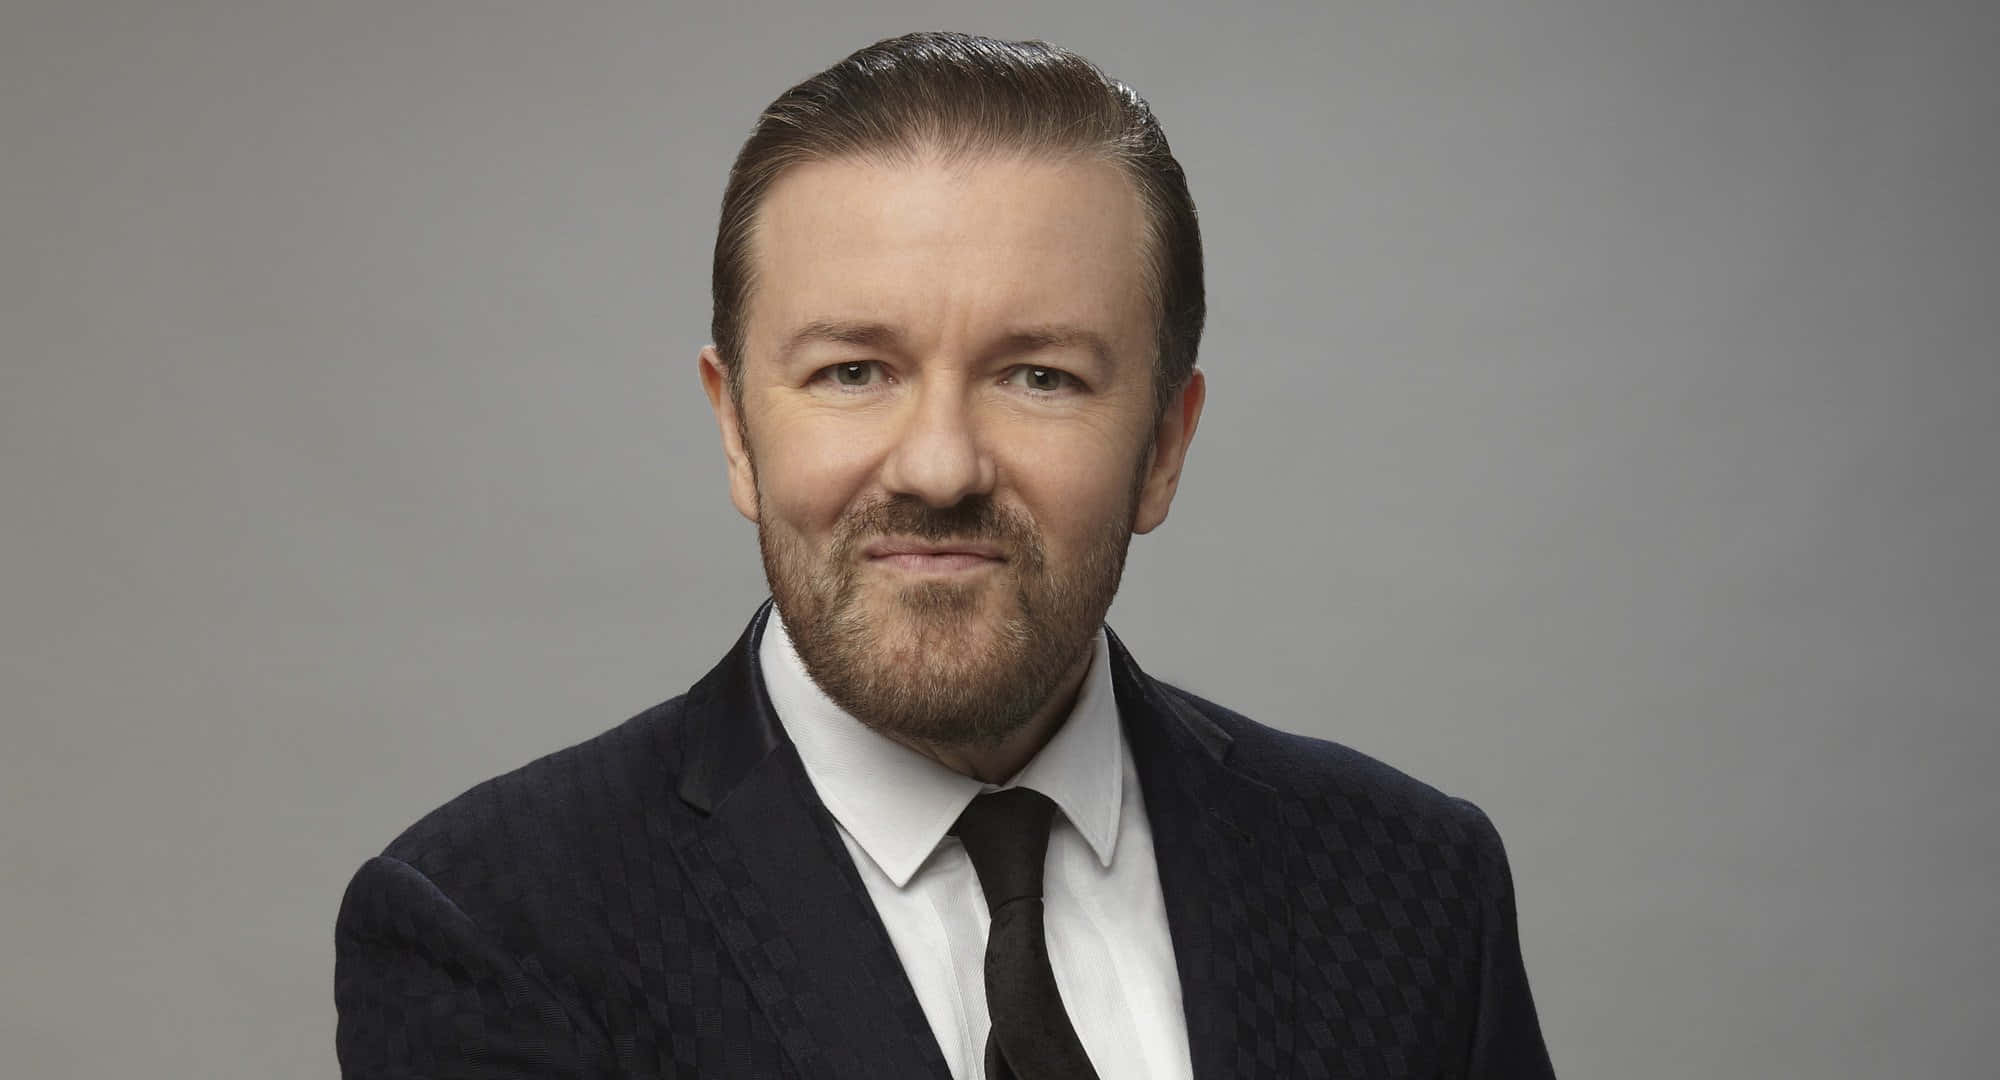 Comedian Ricky Gervais Wallpaper